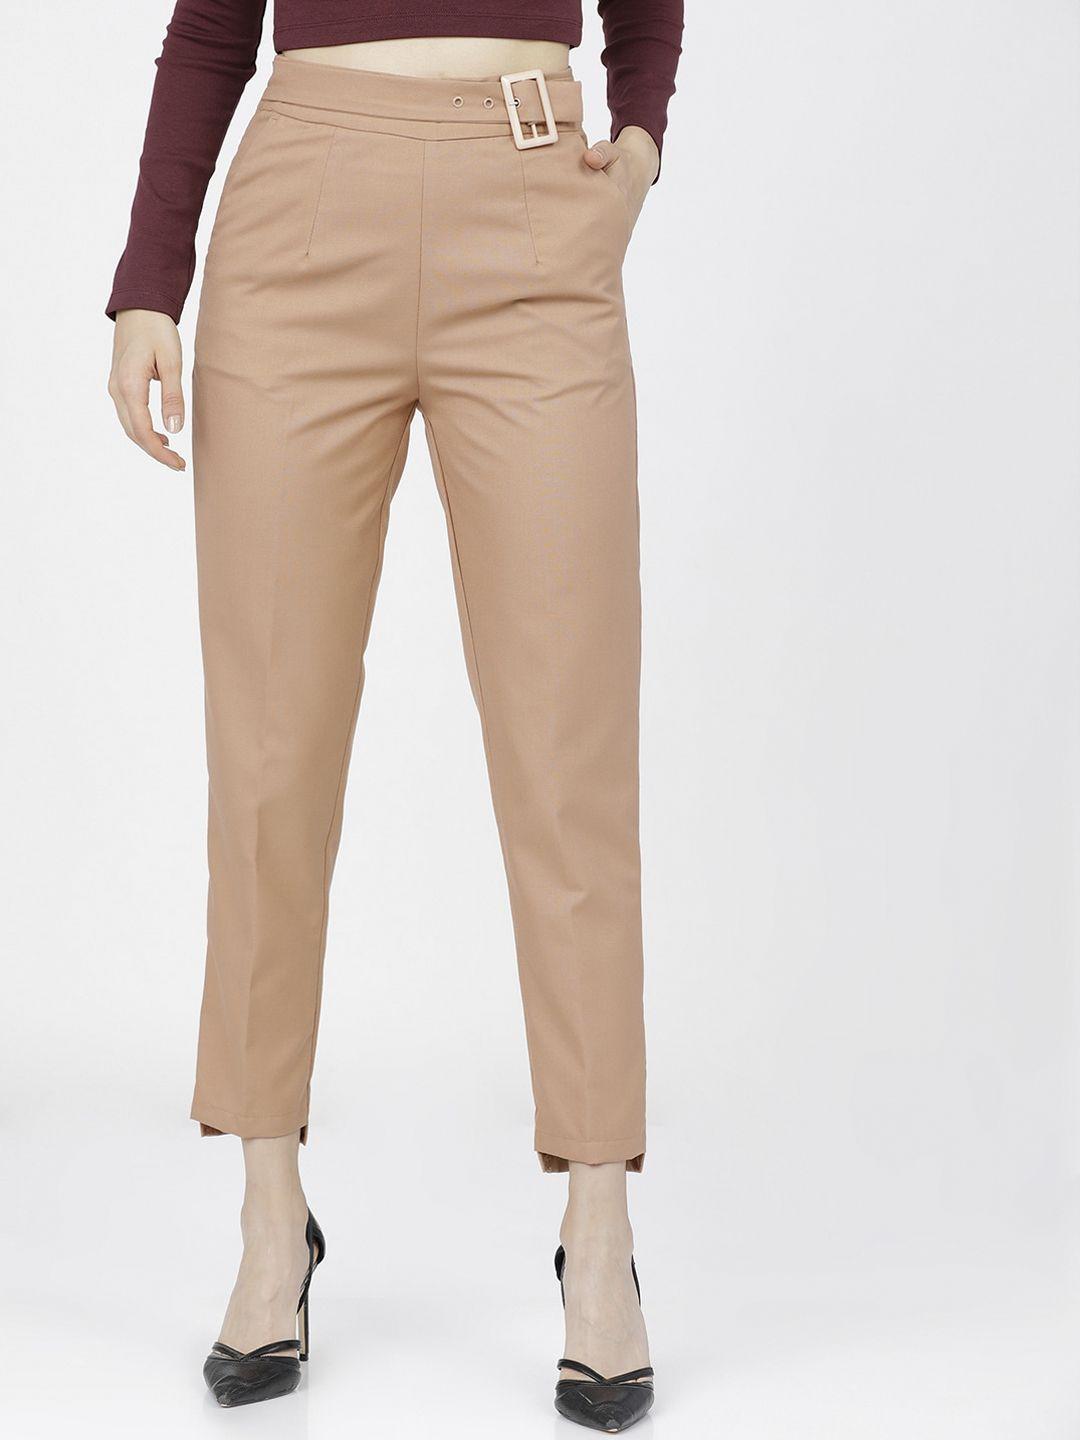 tokyo talkies women camel brown tapered fit easy wash trousers